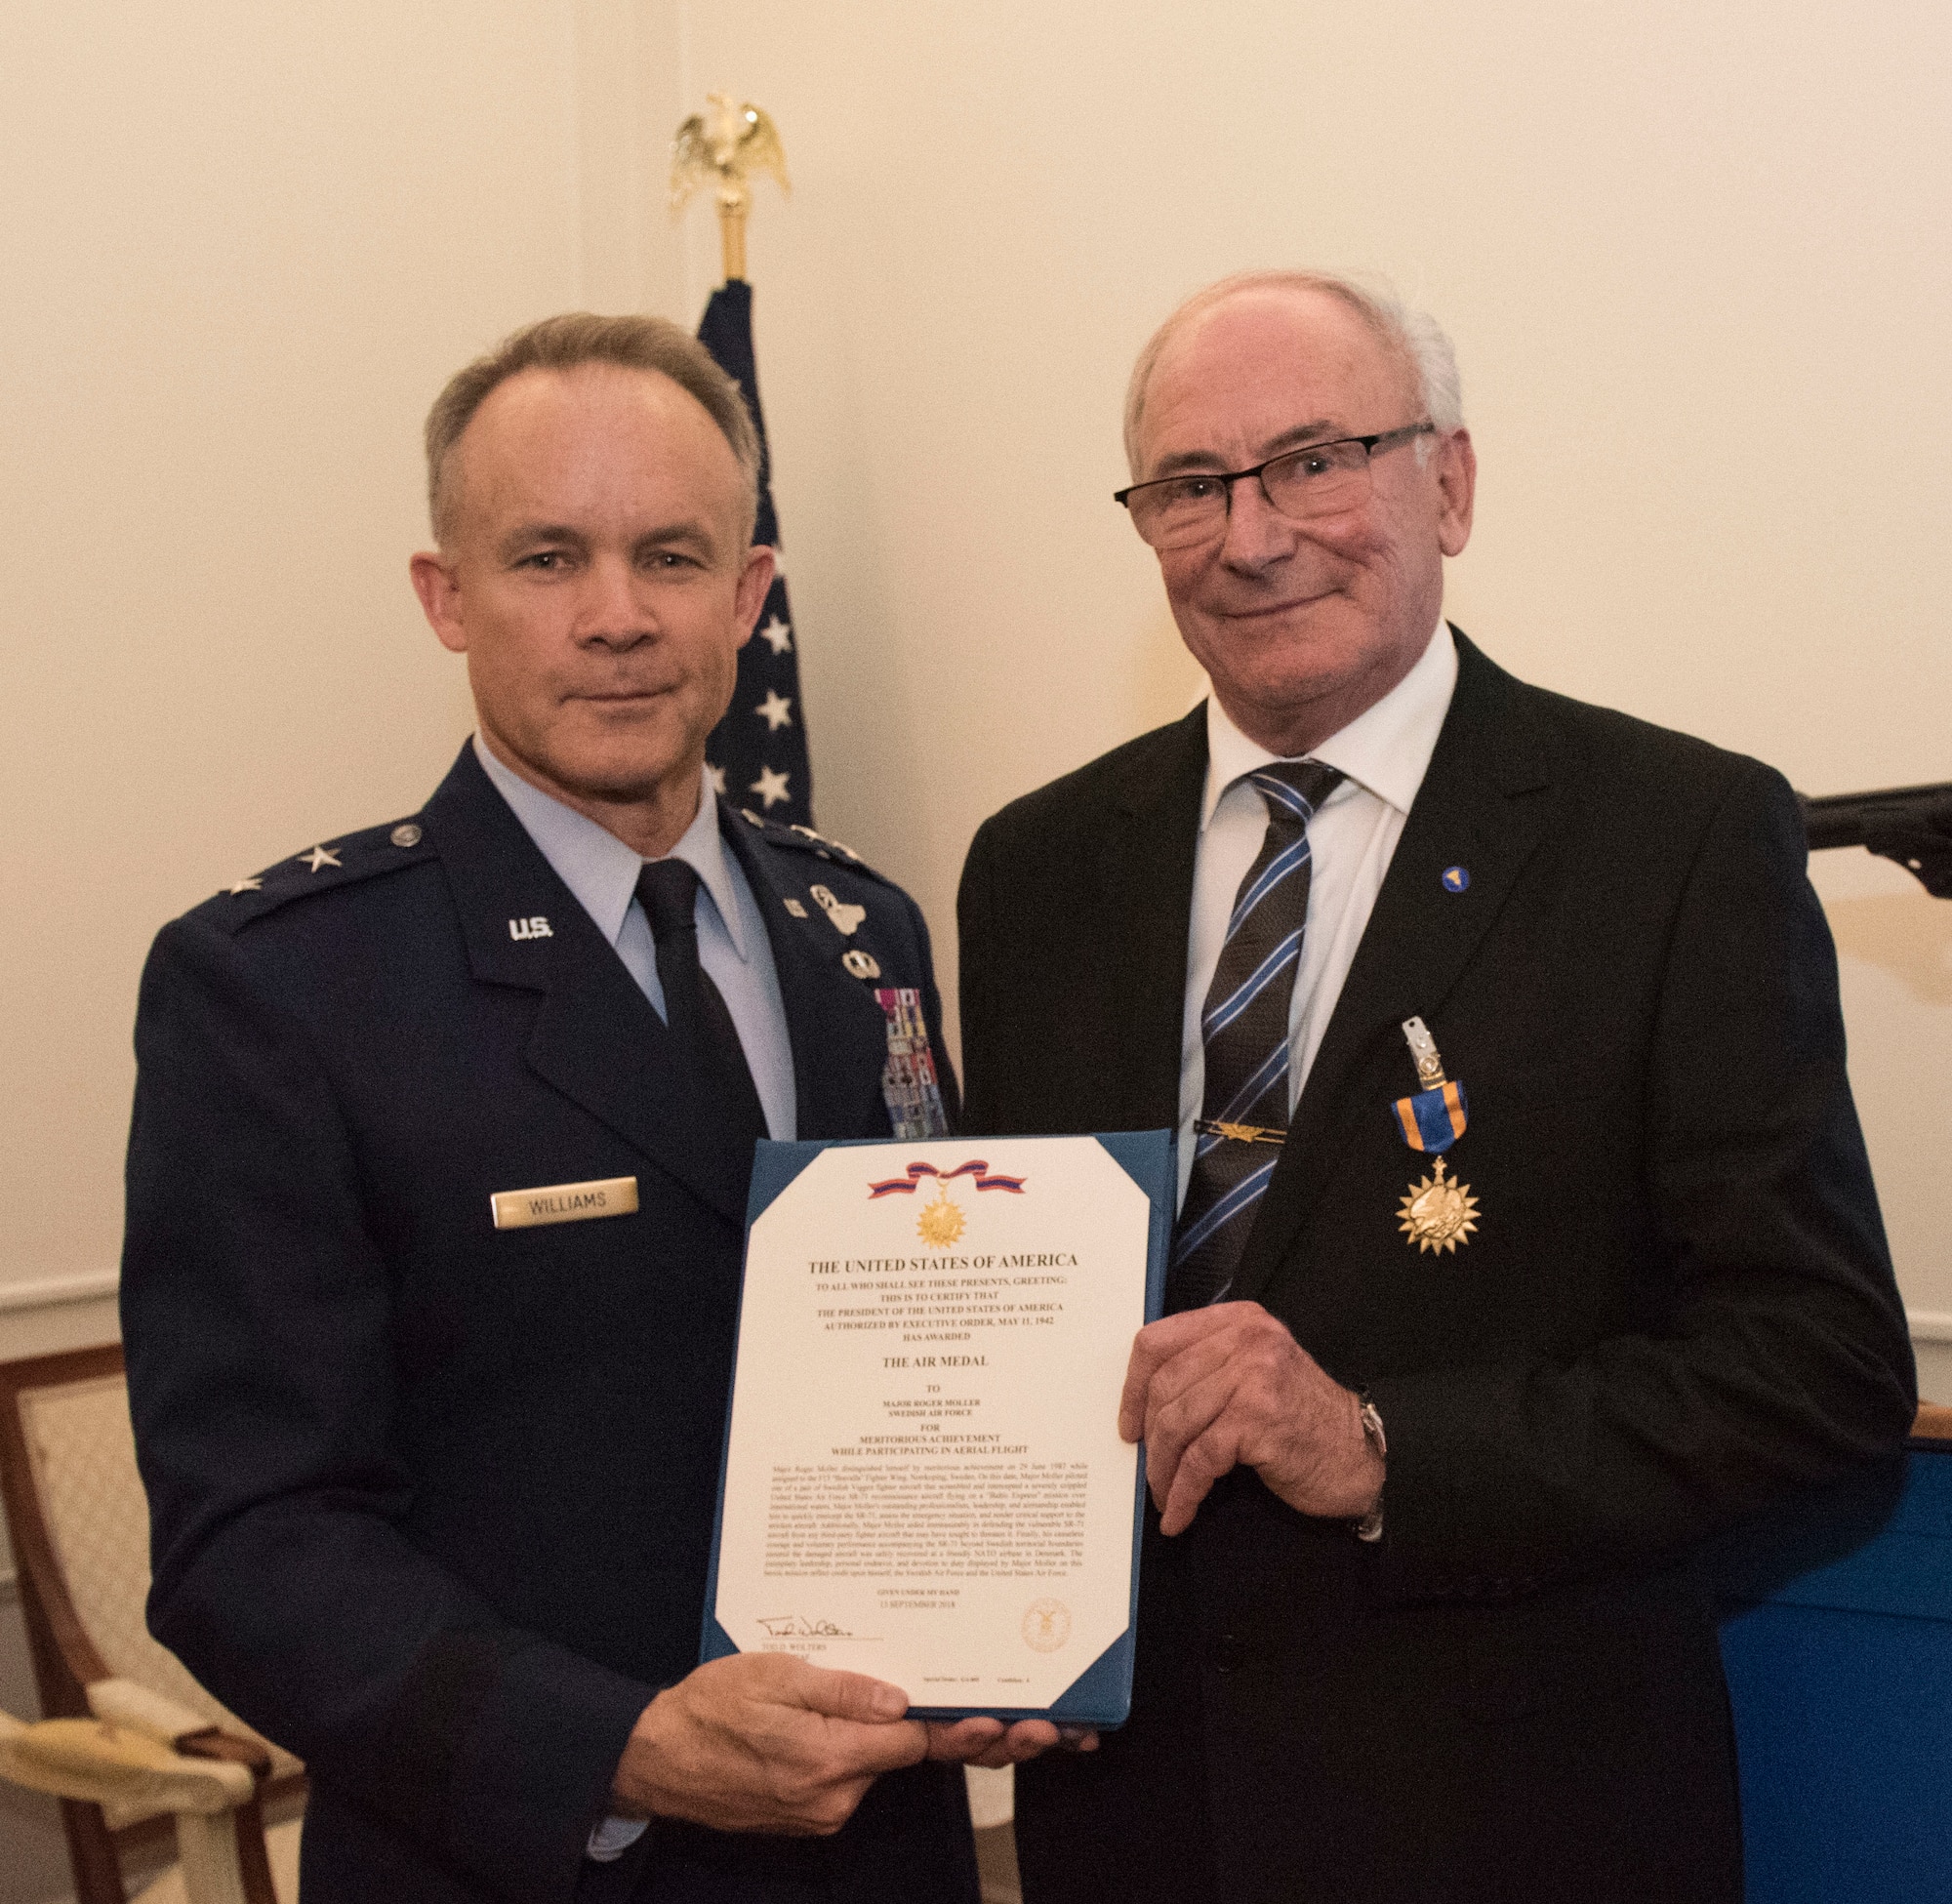 U.S. Air Force Maj. Gen. John Williams, Mobilization Assistant to the commander, U.S. Air Forces in Europe and Africa, presents the U.S. Air Medal to Swedish air force Col. Lars-Erik Blad in Stockholm, Sweden, Nov. 28, 2018. The Swedish pilots were awarded the U.S. Air Medal for their actions on June 29, 1987. (U.S. Air Force Photo by Senior Airman Kelly O'Connor)